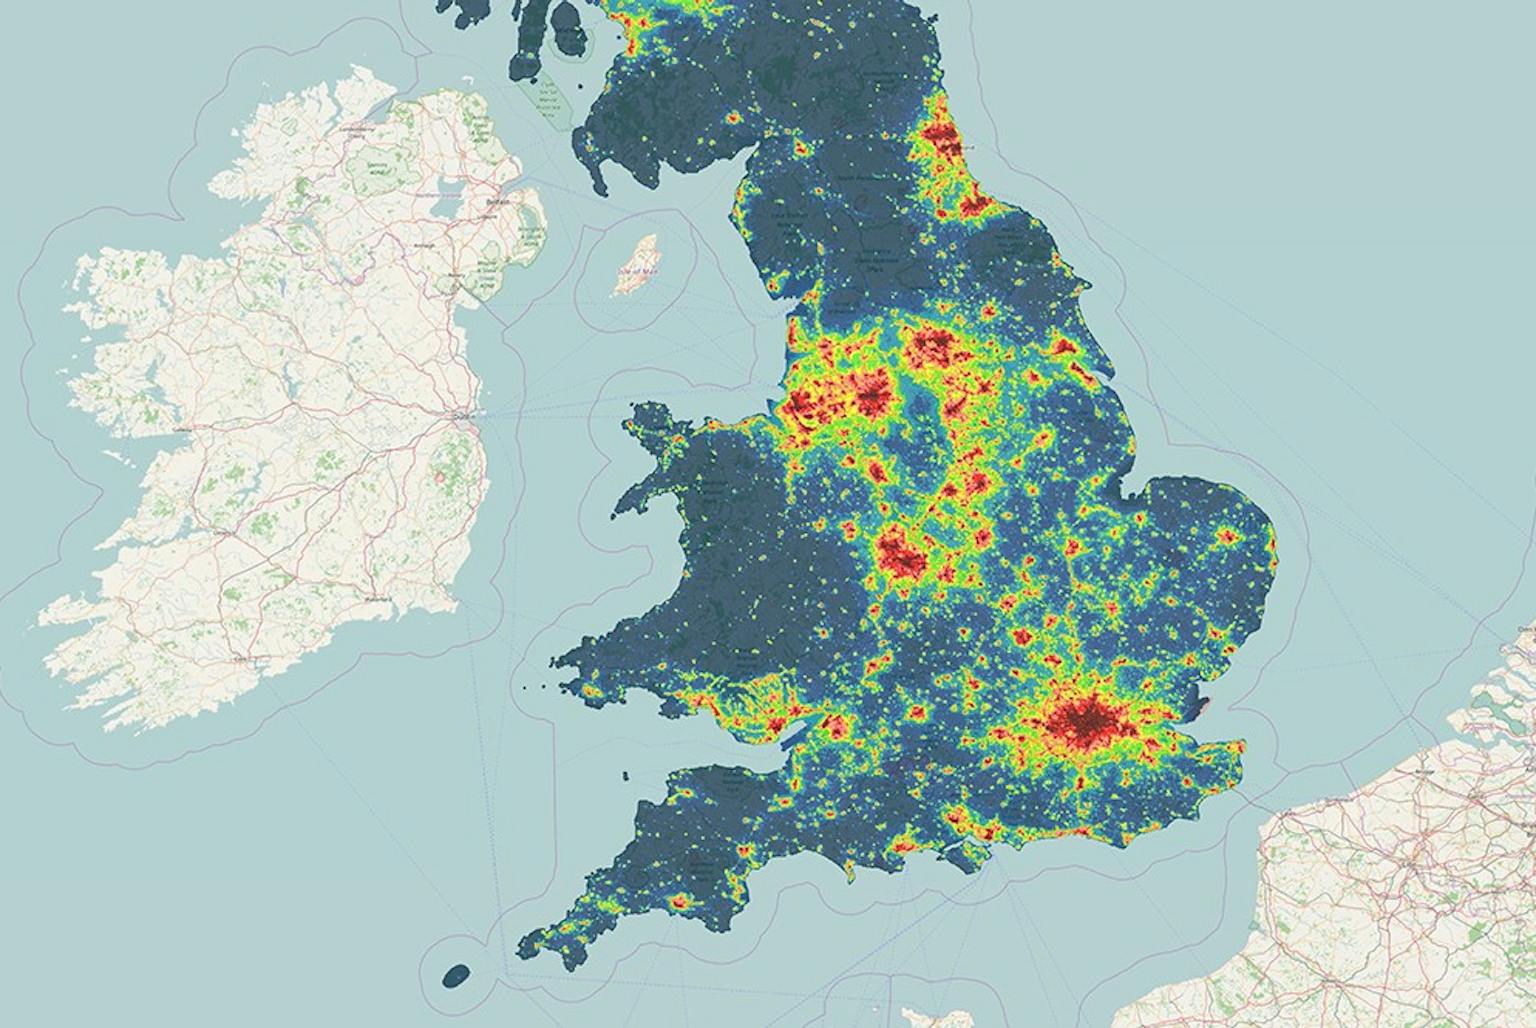 Night Blight: Mapping England’s Light Pollution and Dark Skies